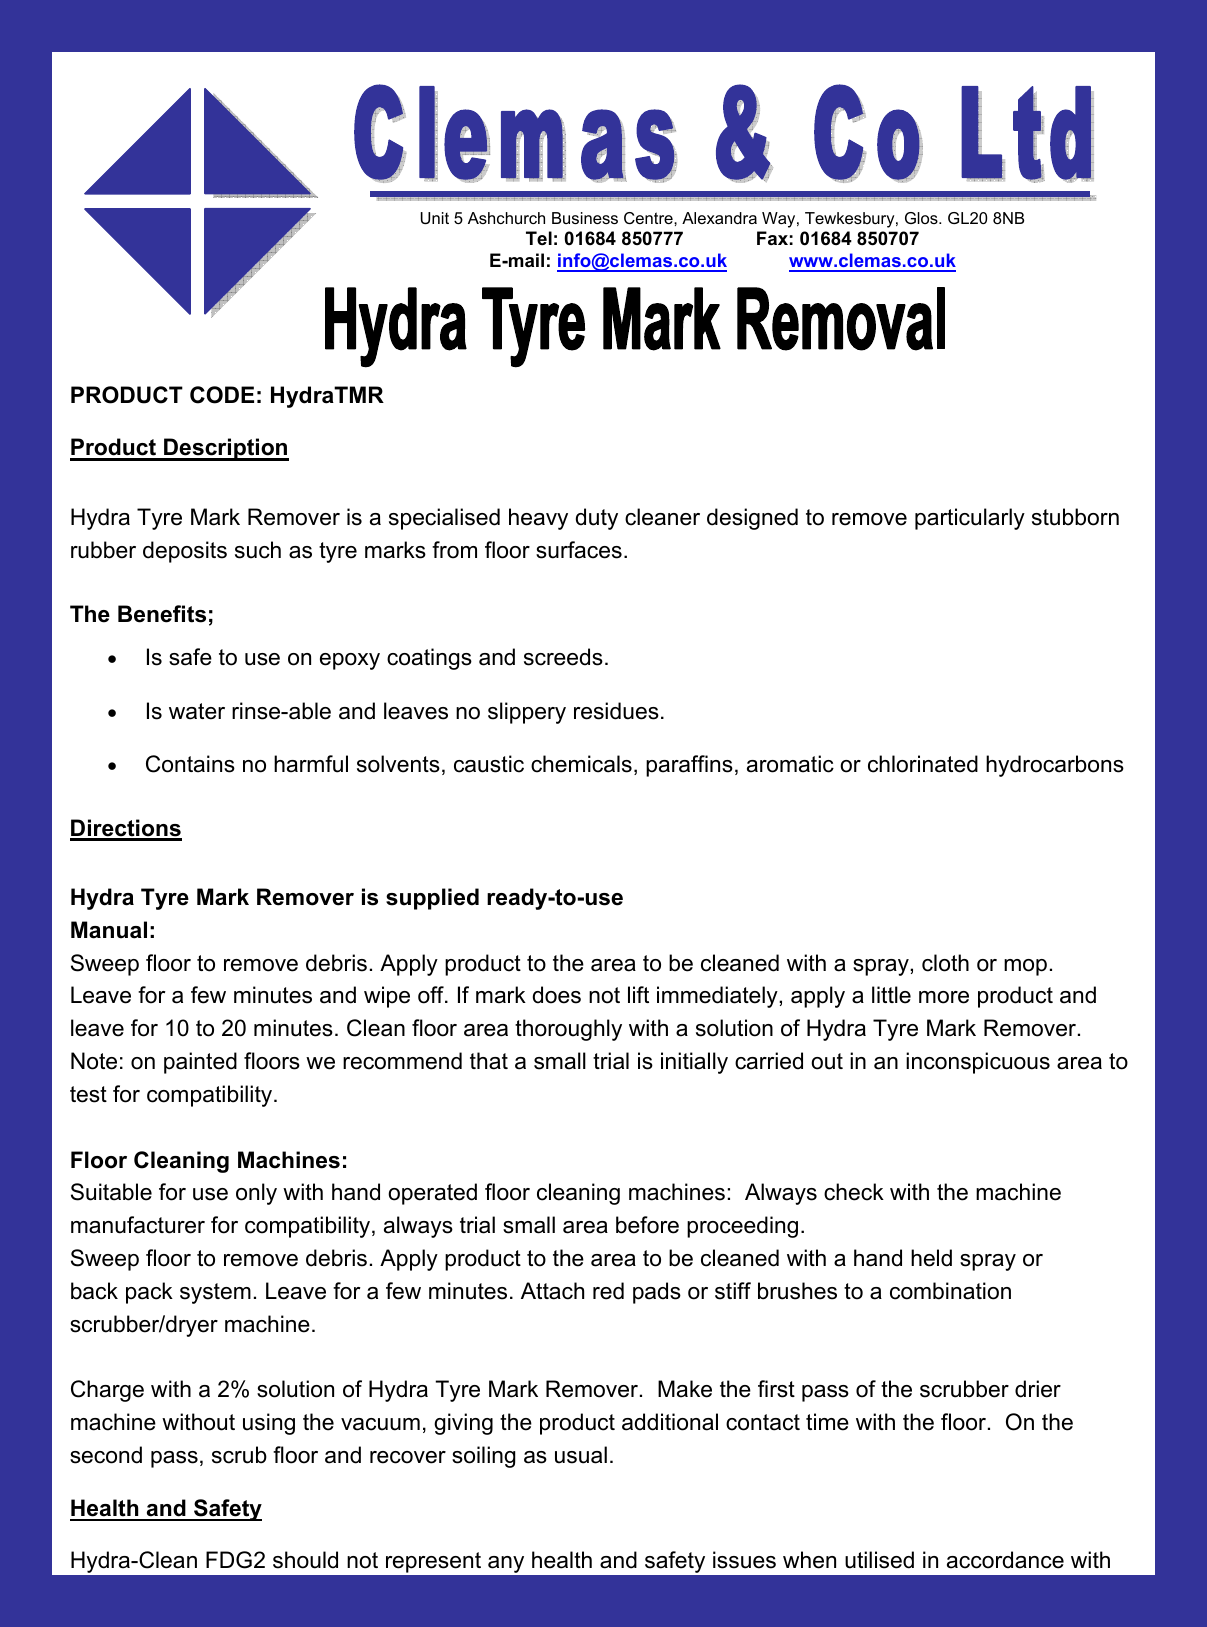 Page 1 of 2 - Clemas - Hydra Tyre Mark Remover Chemical Data Sheet Hydra-Tyre-Mark-Remover-Chemical-Data-Sheet